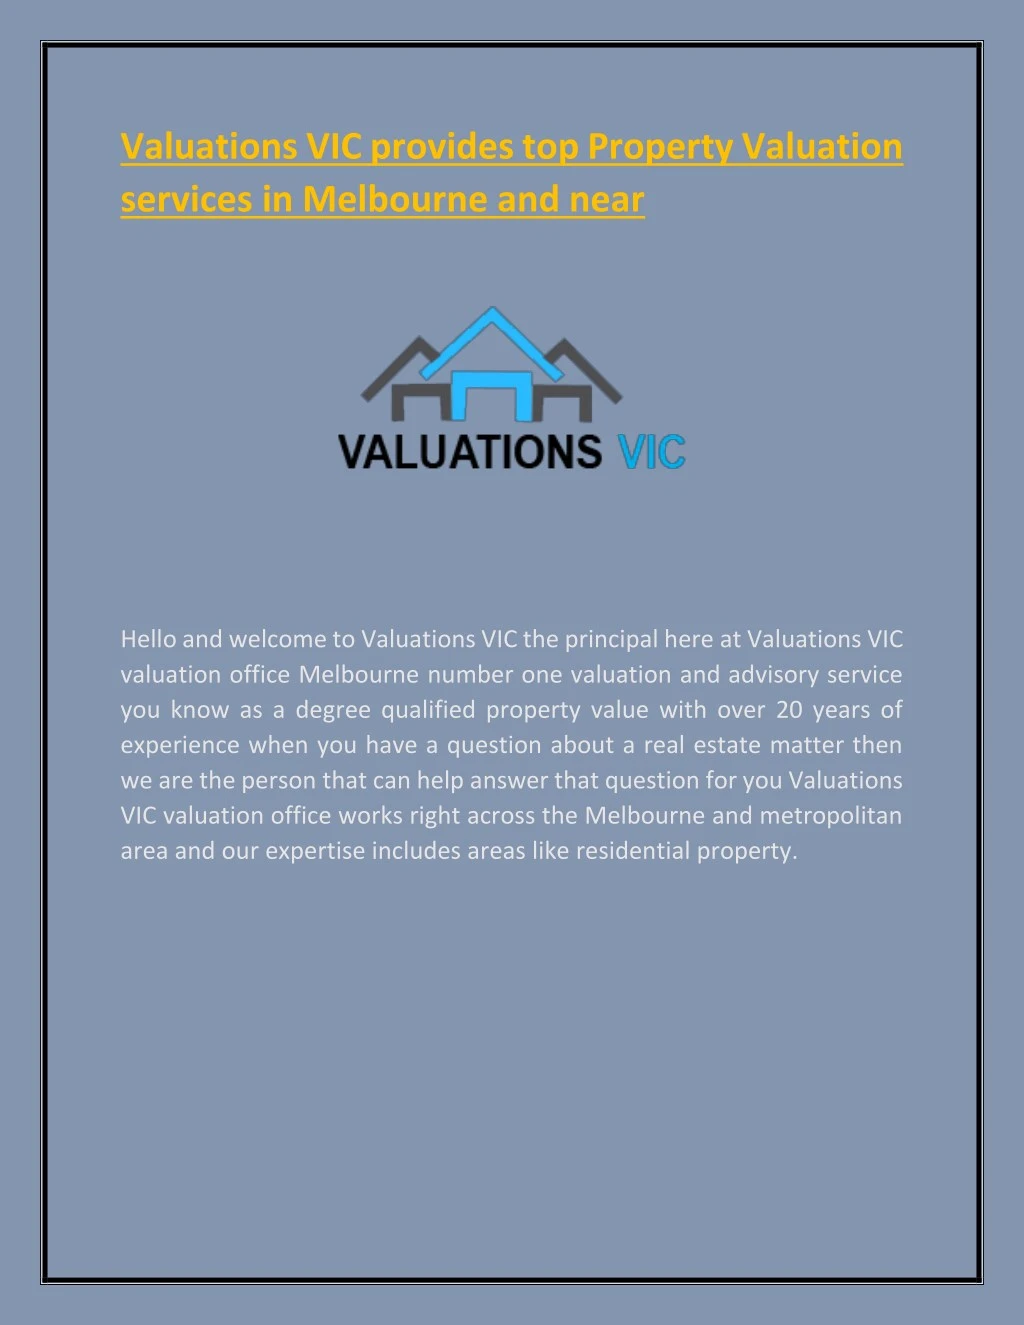 valuations vic provides top property valuation